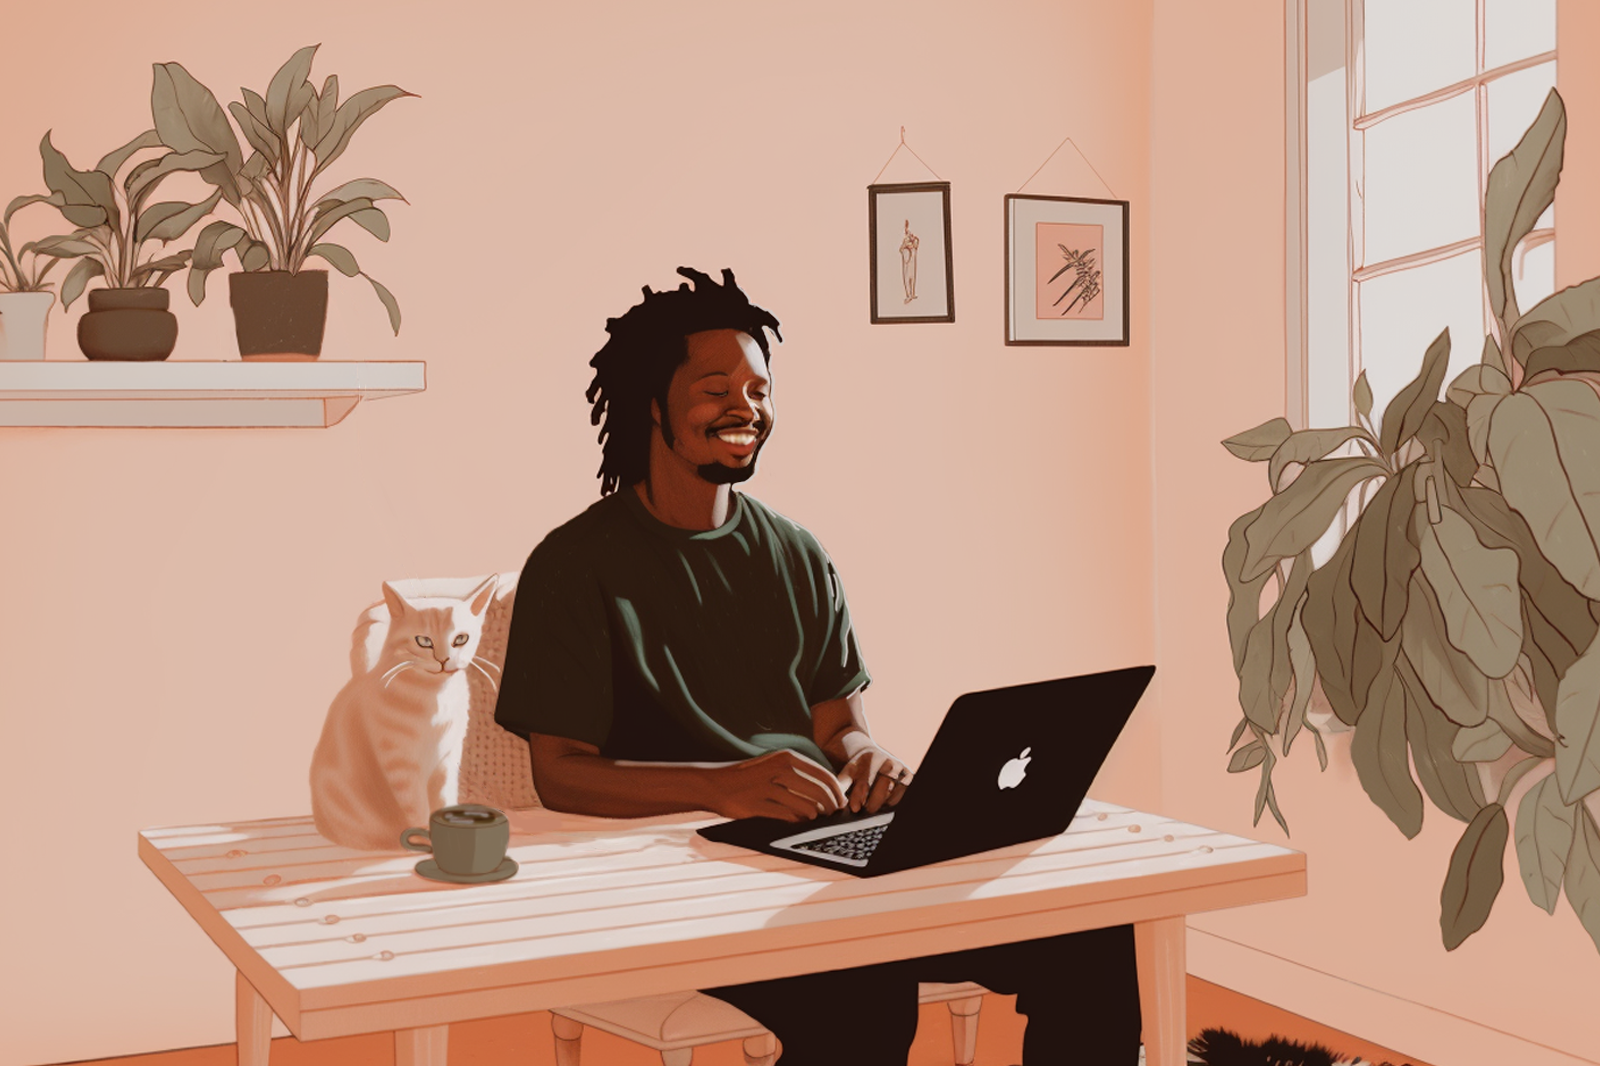 Man on chair with laptop, coffee mug, and a cat on the table in a room